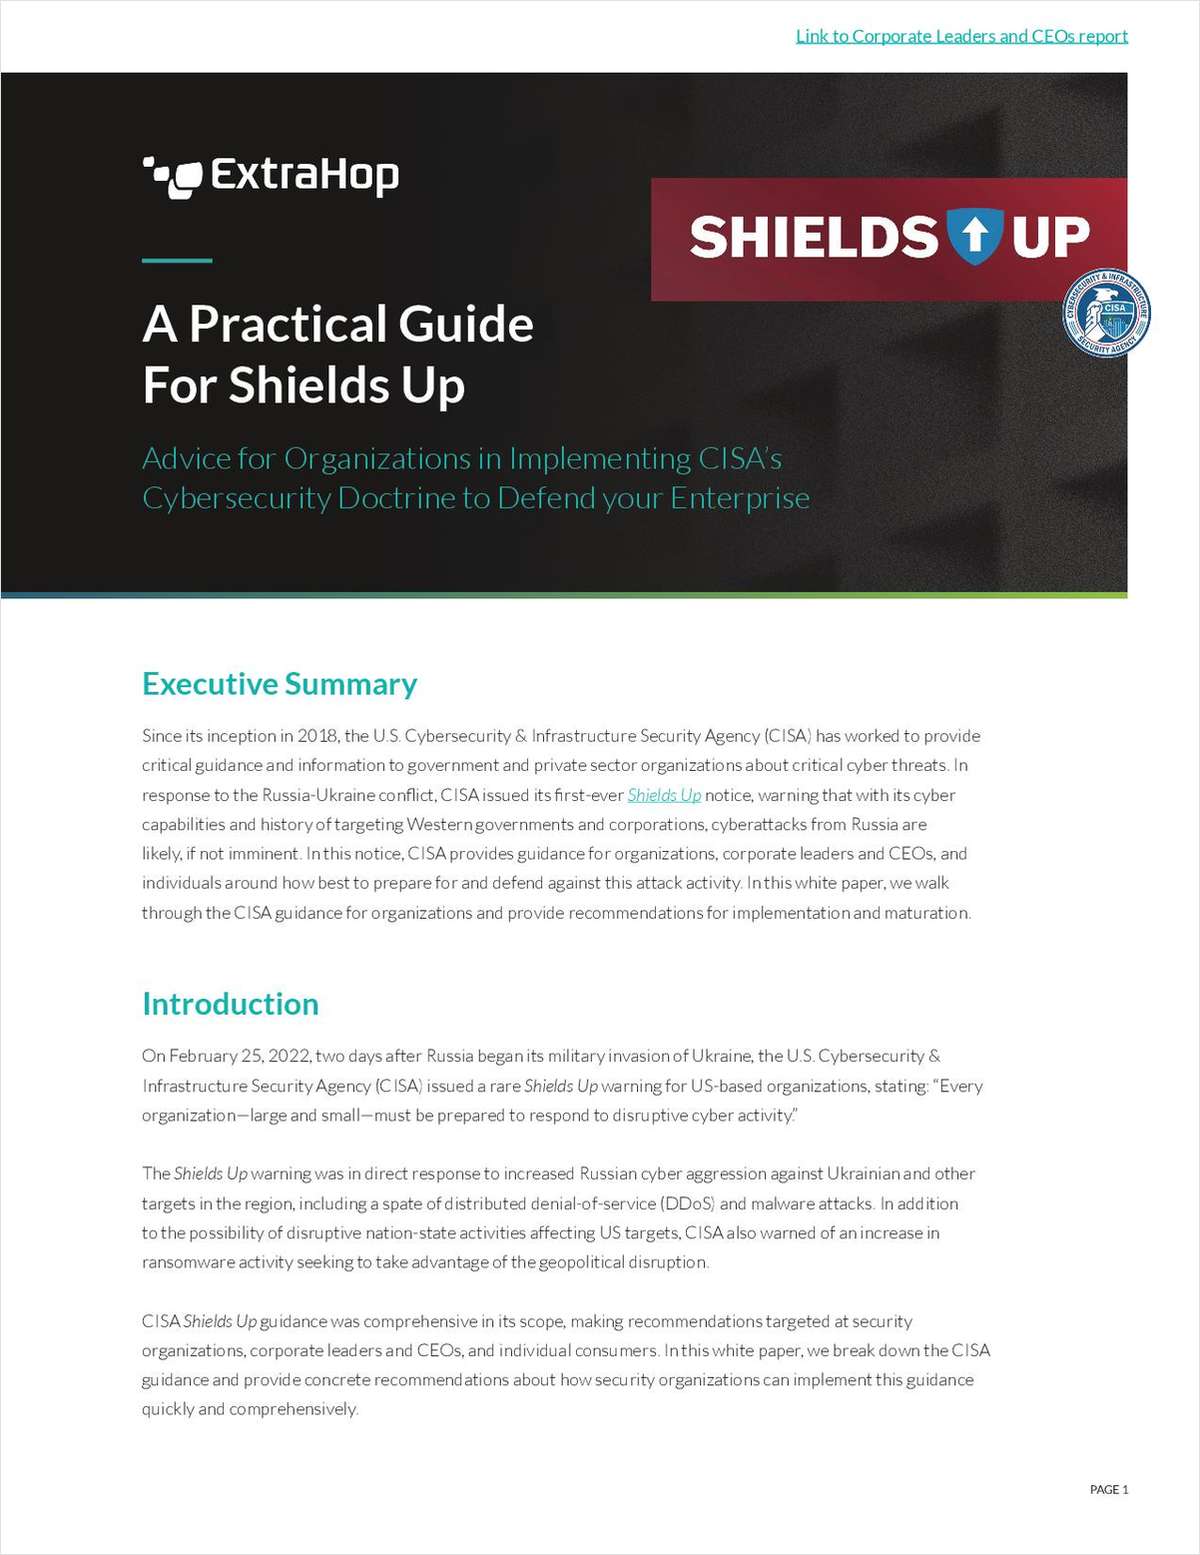 A Practical Guide for Shields Up - For Organizations